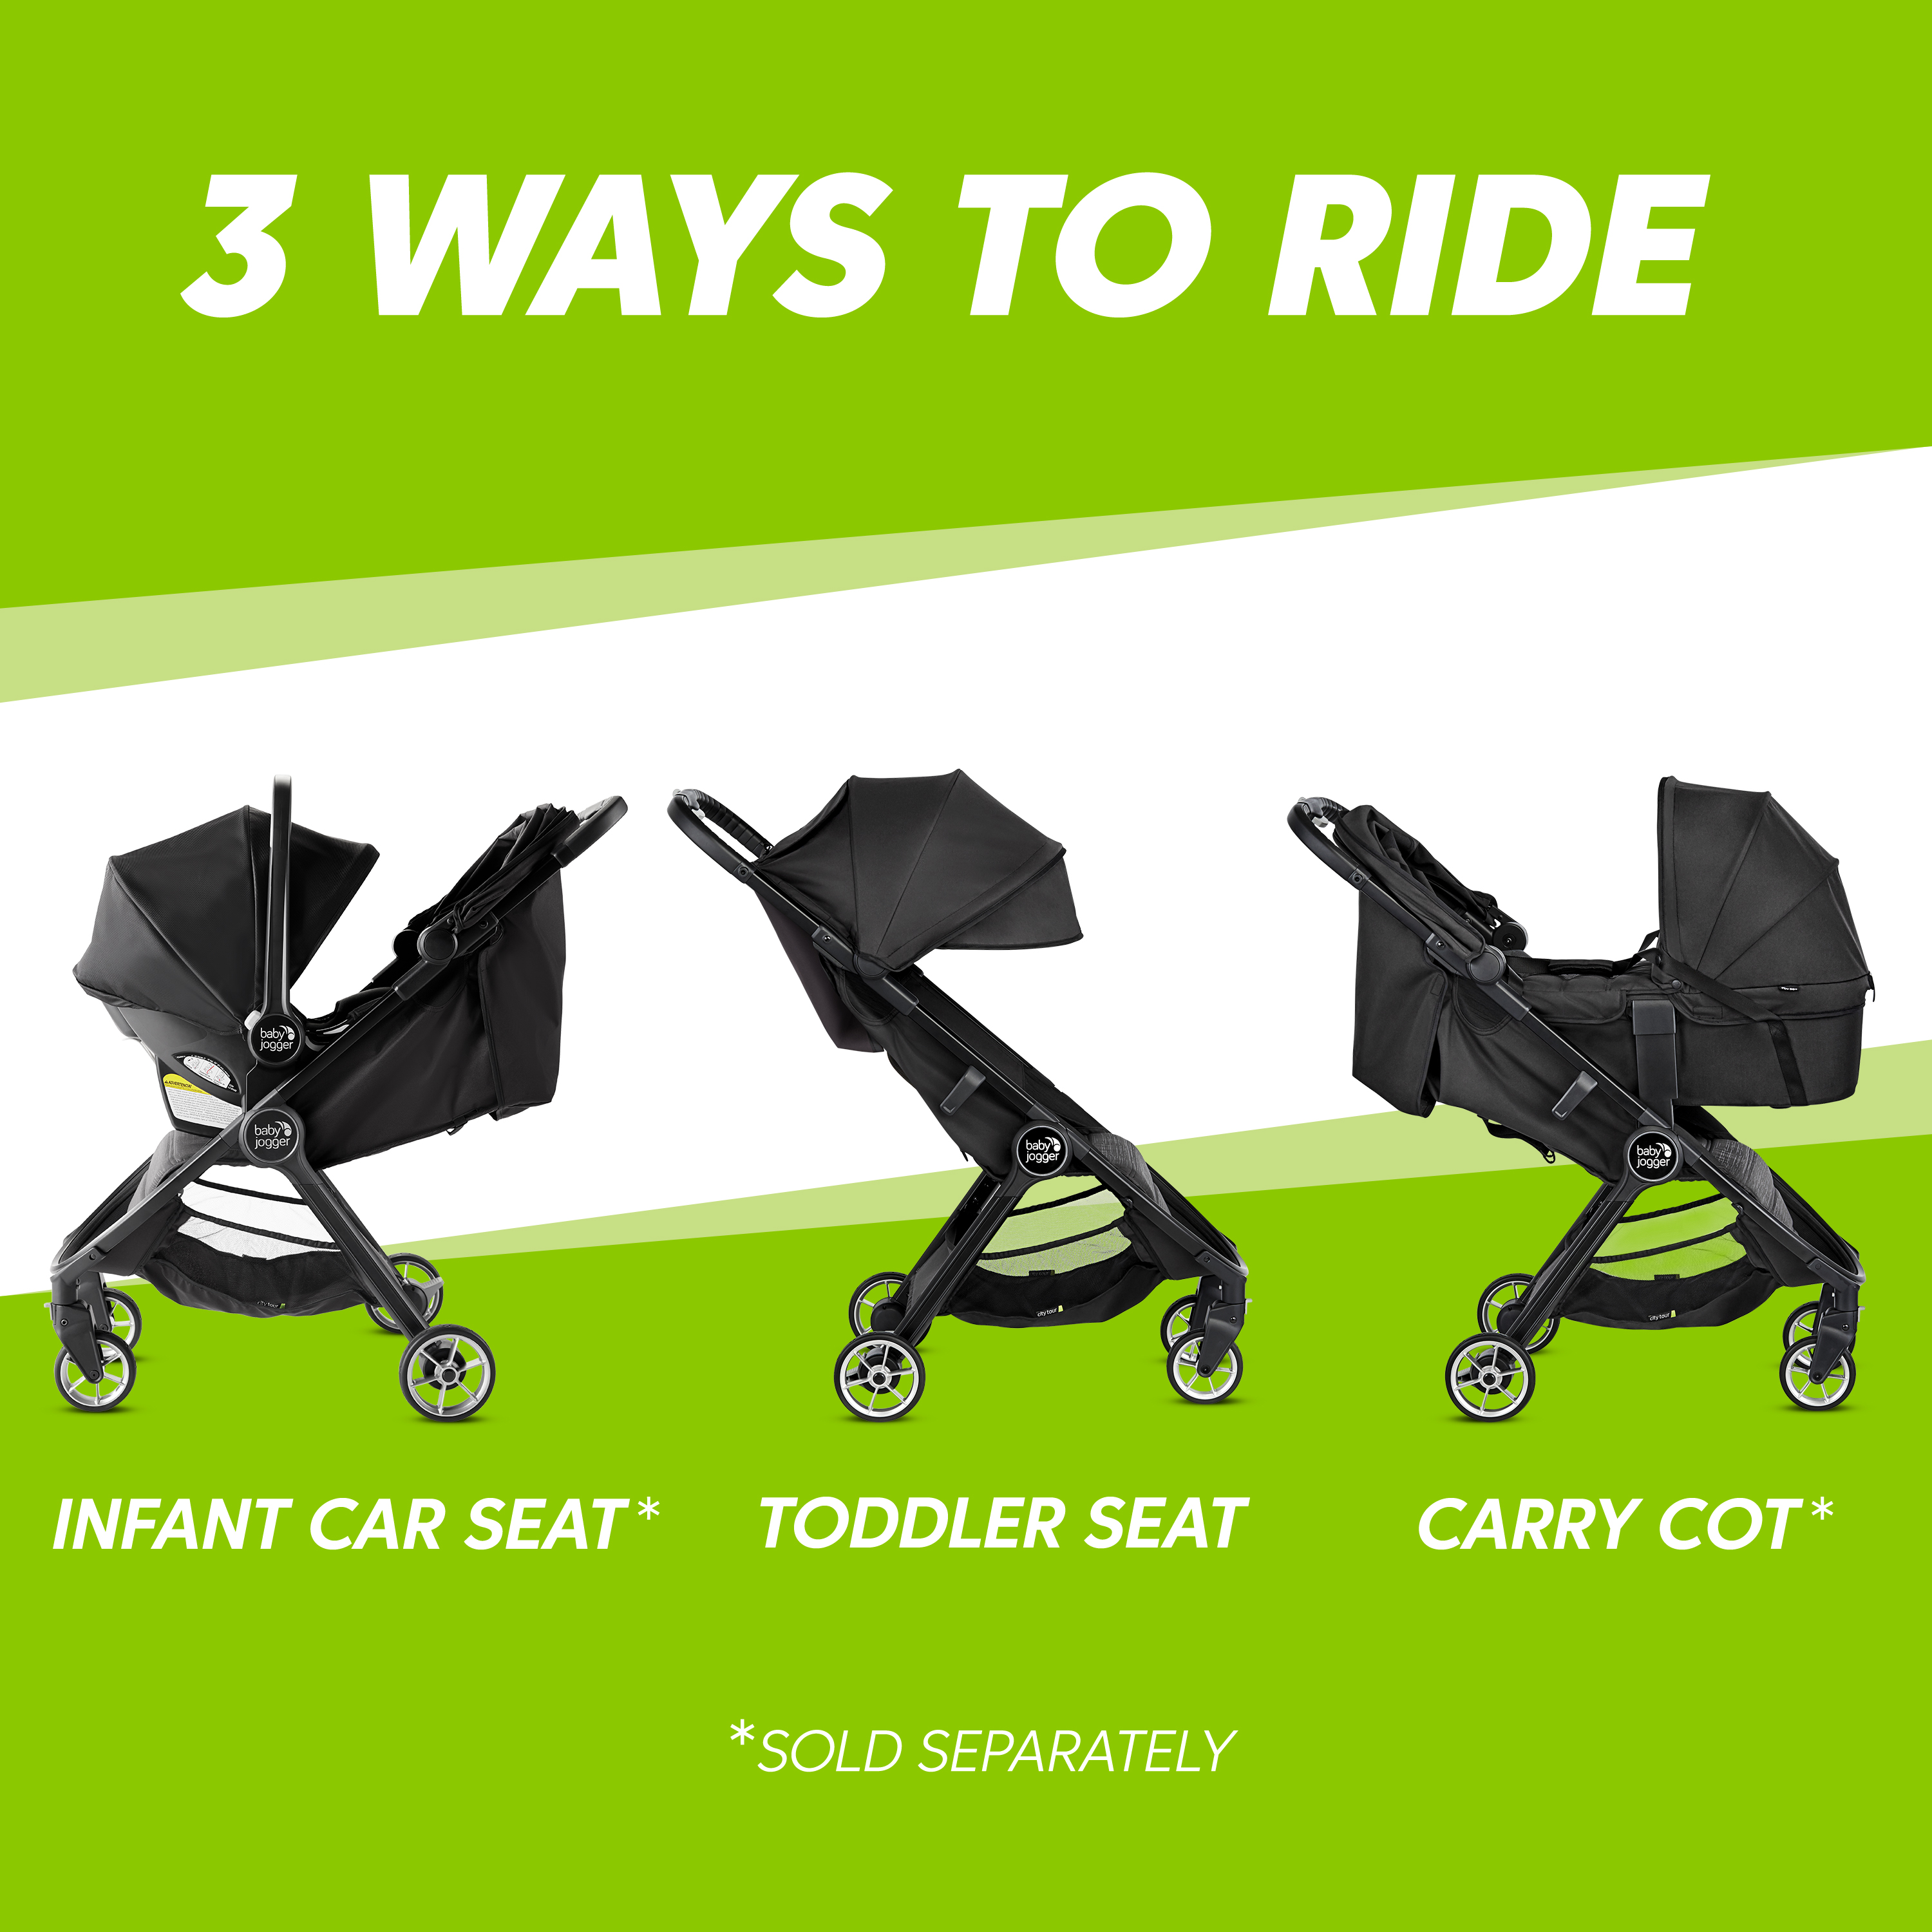 baby jogger city tour 2 folded dimensions